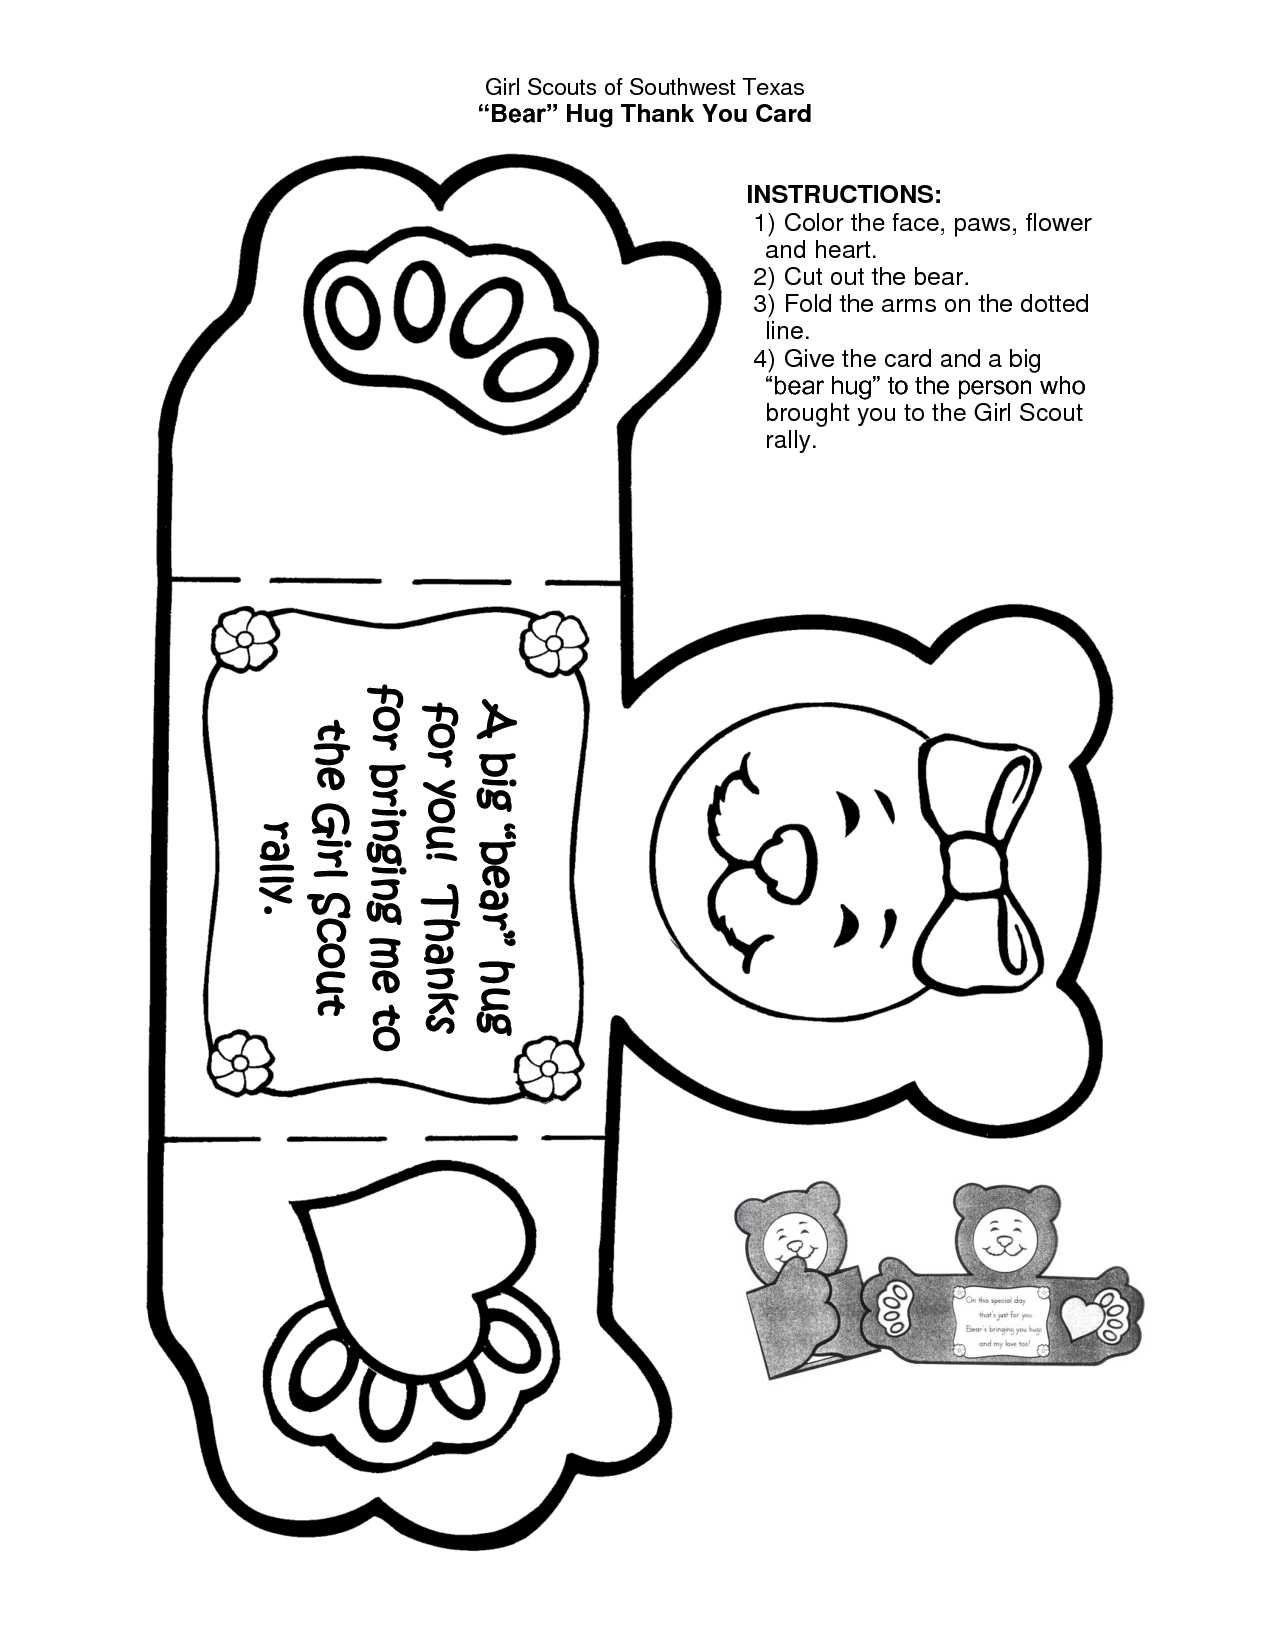 Coloring Pages : Best Coloring Free Printable Thank You Throughout Christmas Thank You Card Templates Free